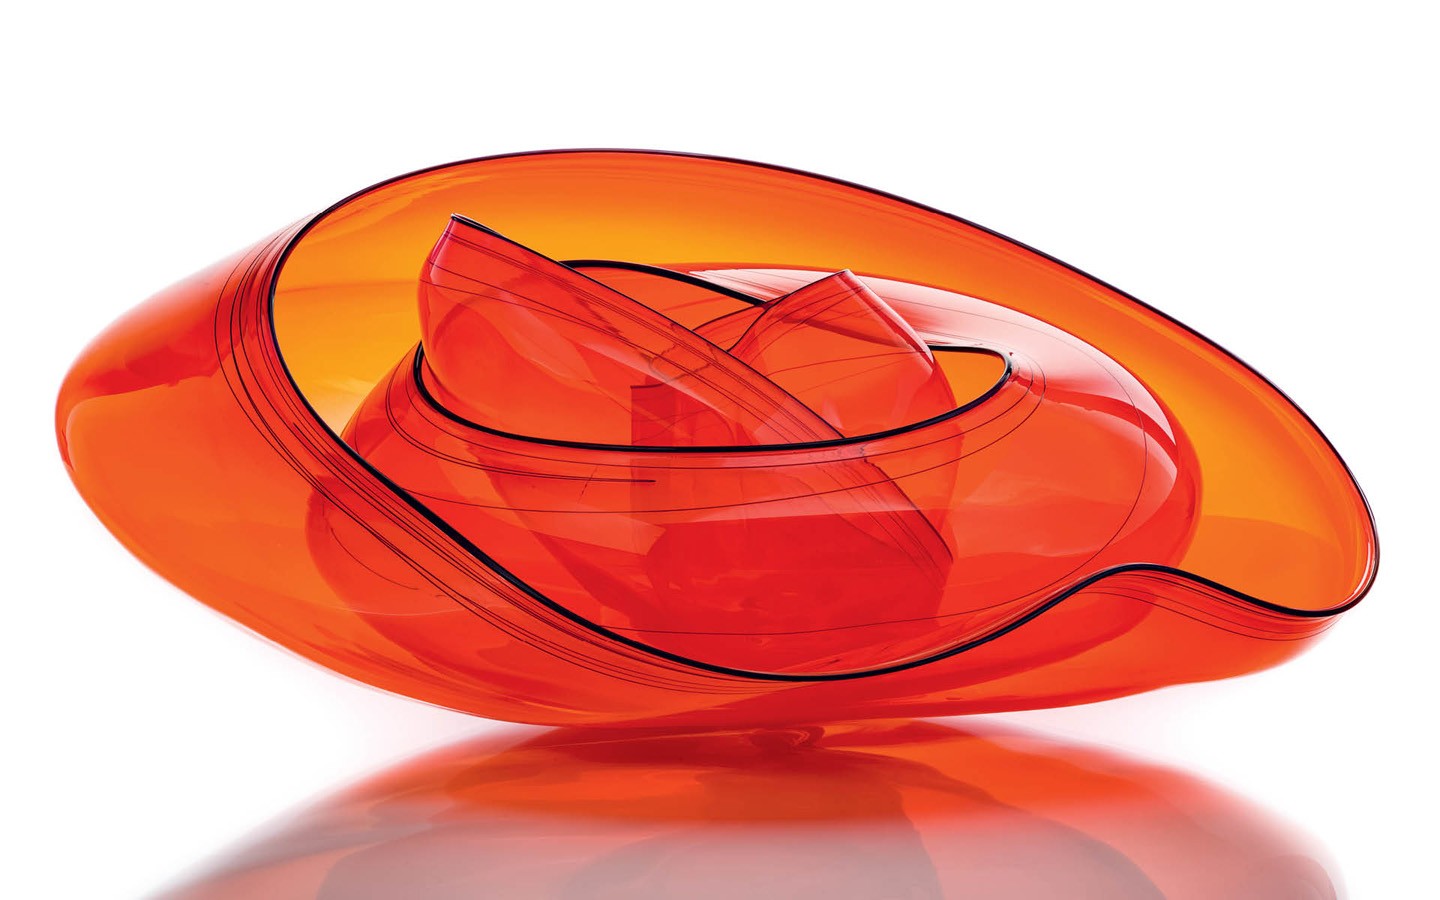 Fire Orange Basket Set The Dale Chihuly Collection.